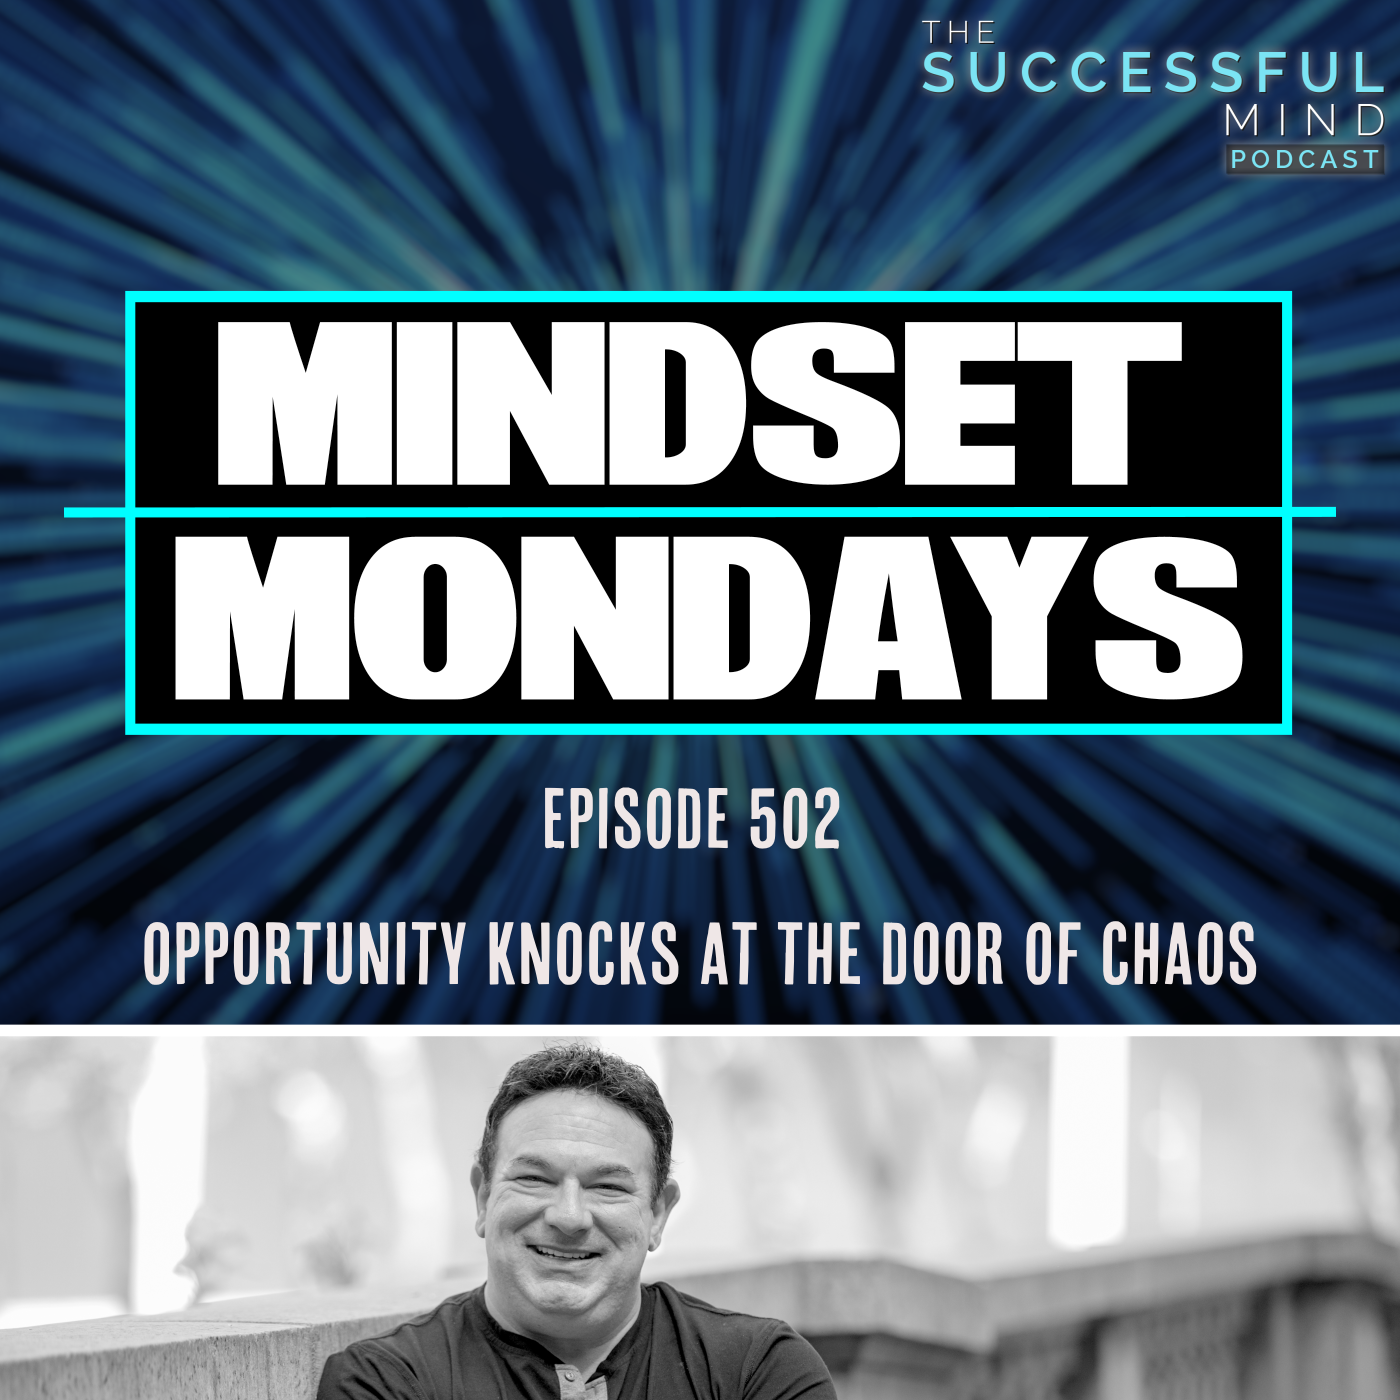 The Successful Mind Podcast – Episode 502 – Mindset Monday’s – Opportunity Knocks at the Door of Chaos